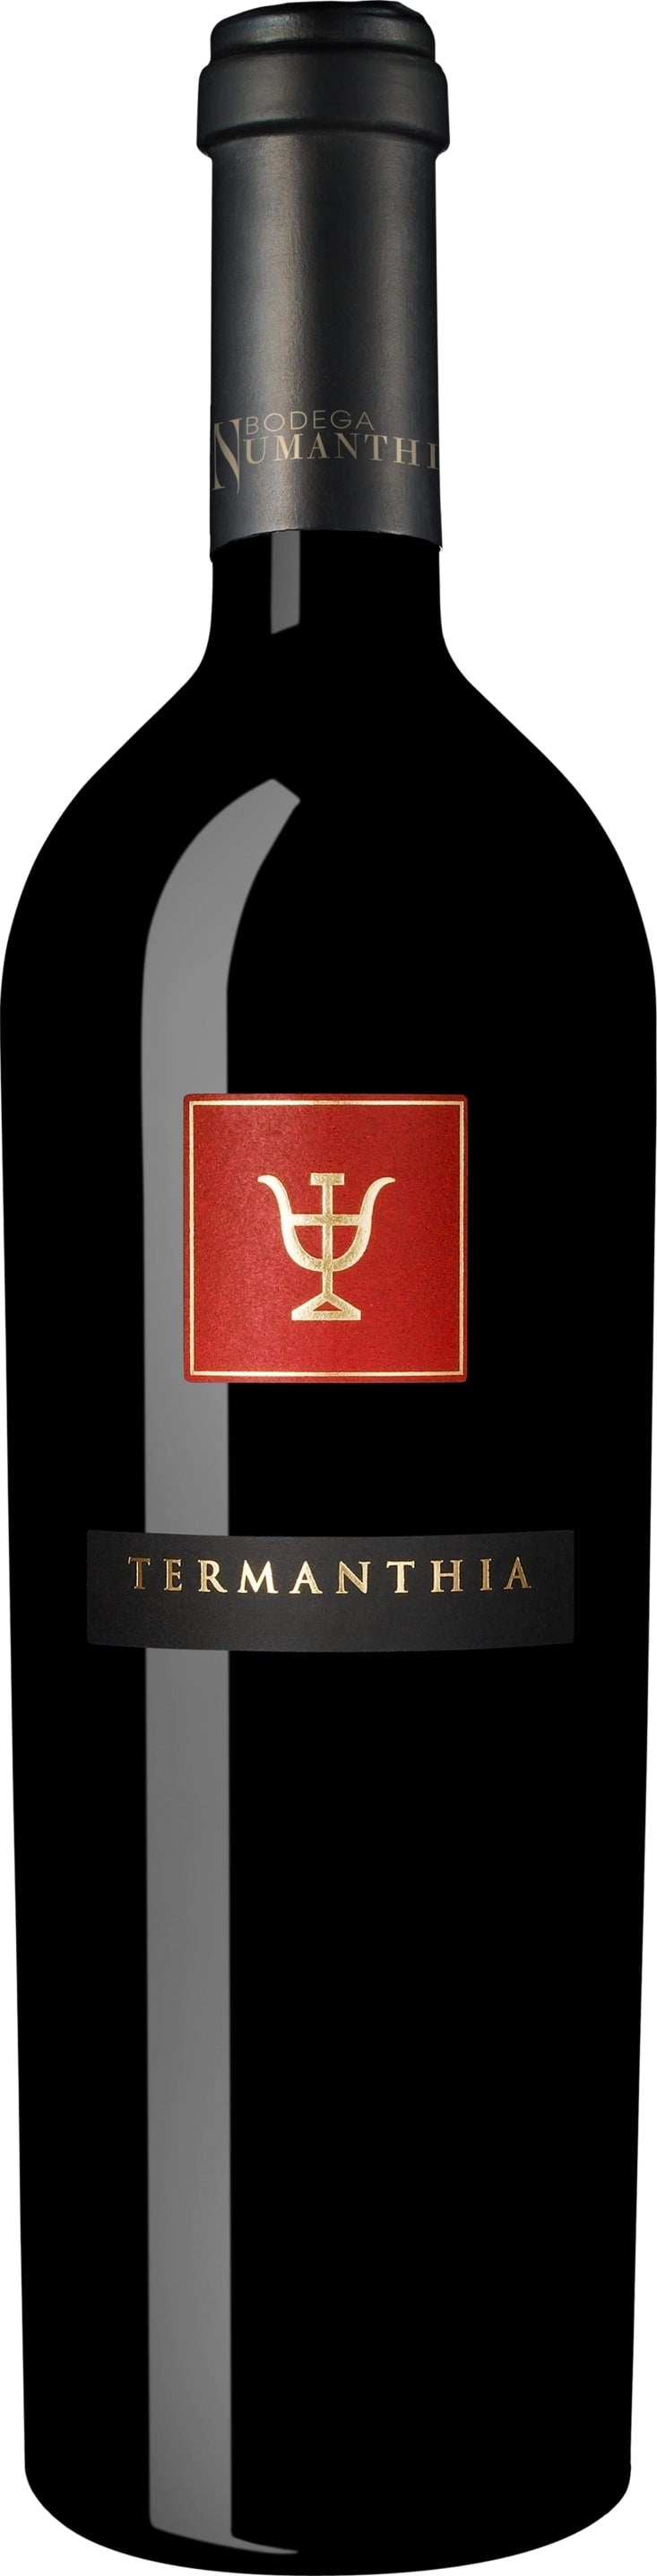 Numanthia Termanthia 2012 75cl - Buy Numanthia Wines from GREAT WINES DIRECT wine shop